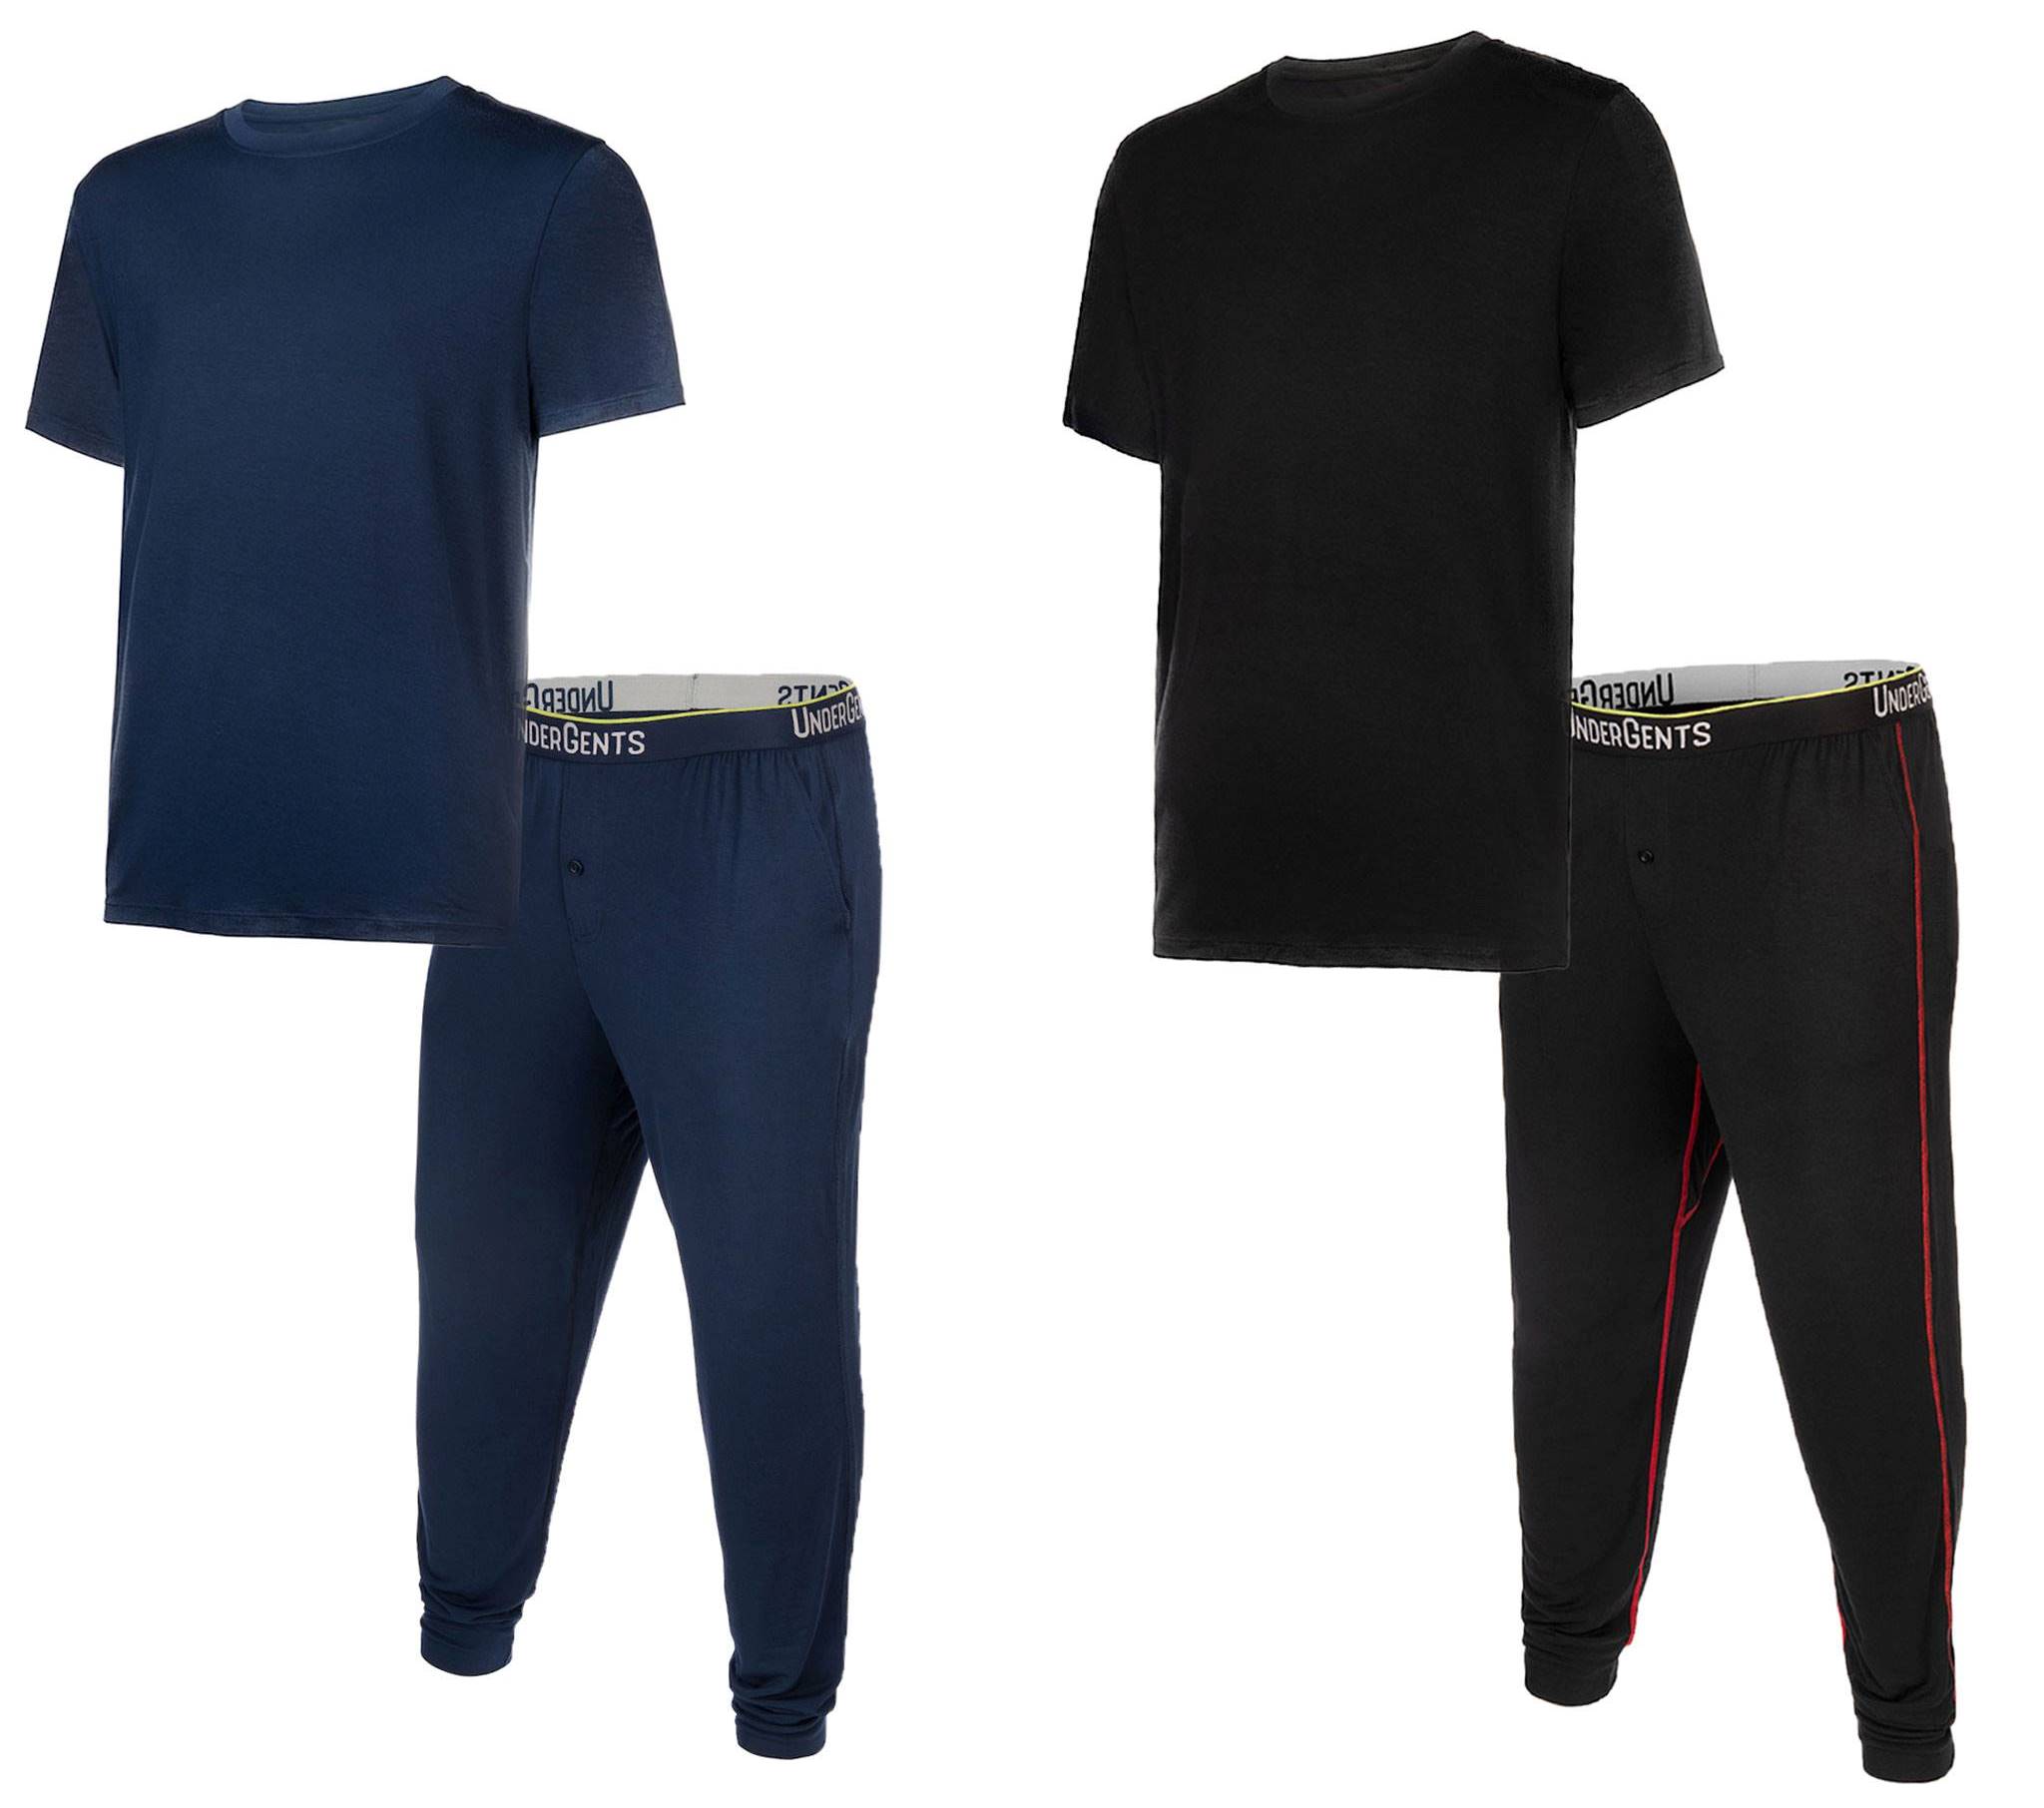 UnderGents Swagger Men’s Lounge Wear collection